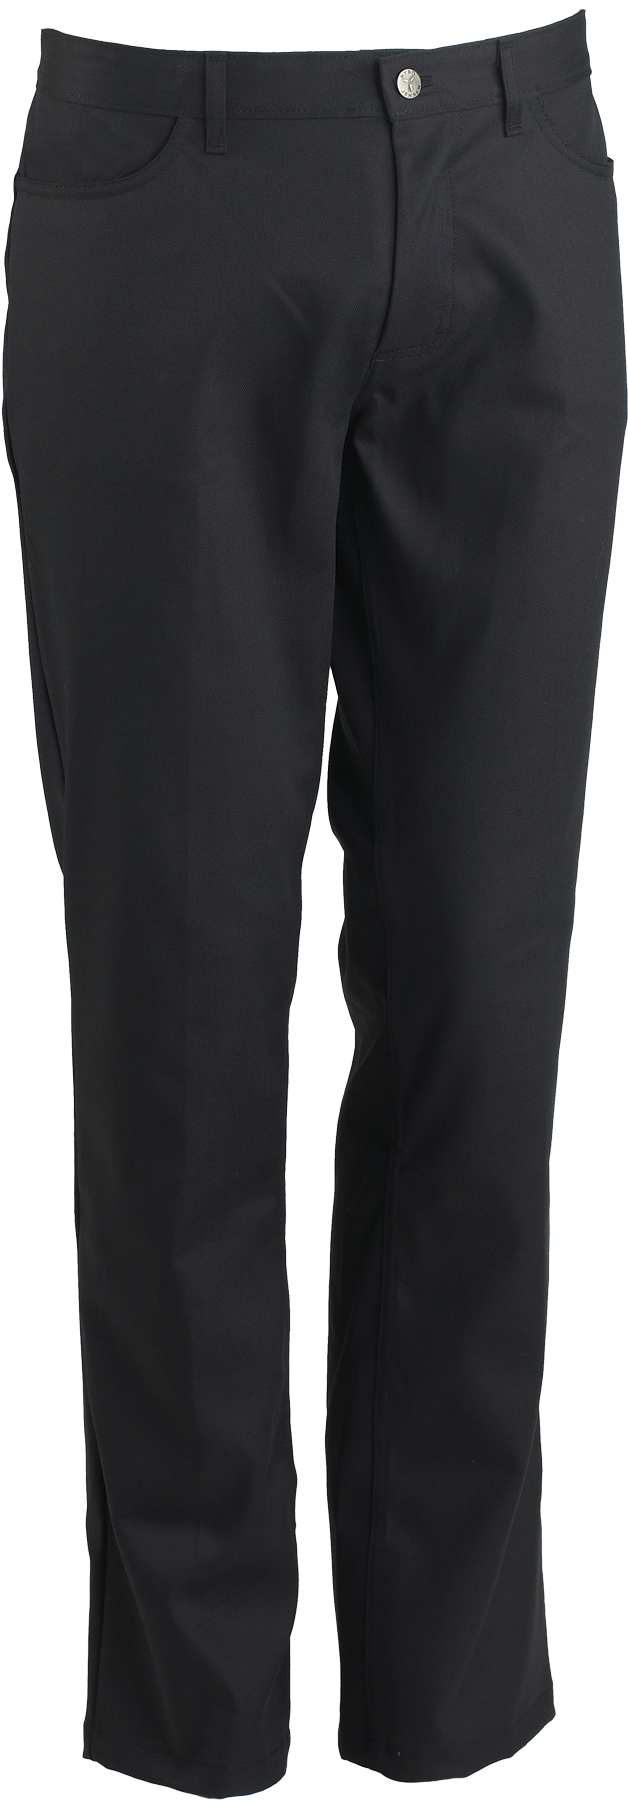 Trousers w. jeans look, Club-Classic (2051271) 